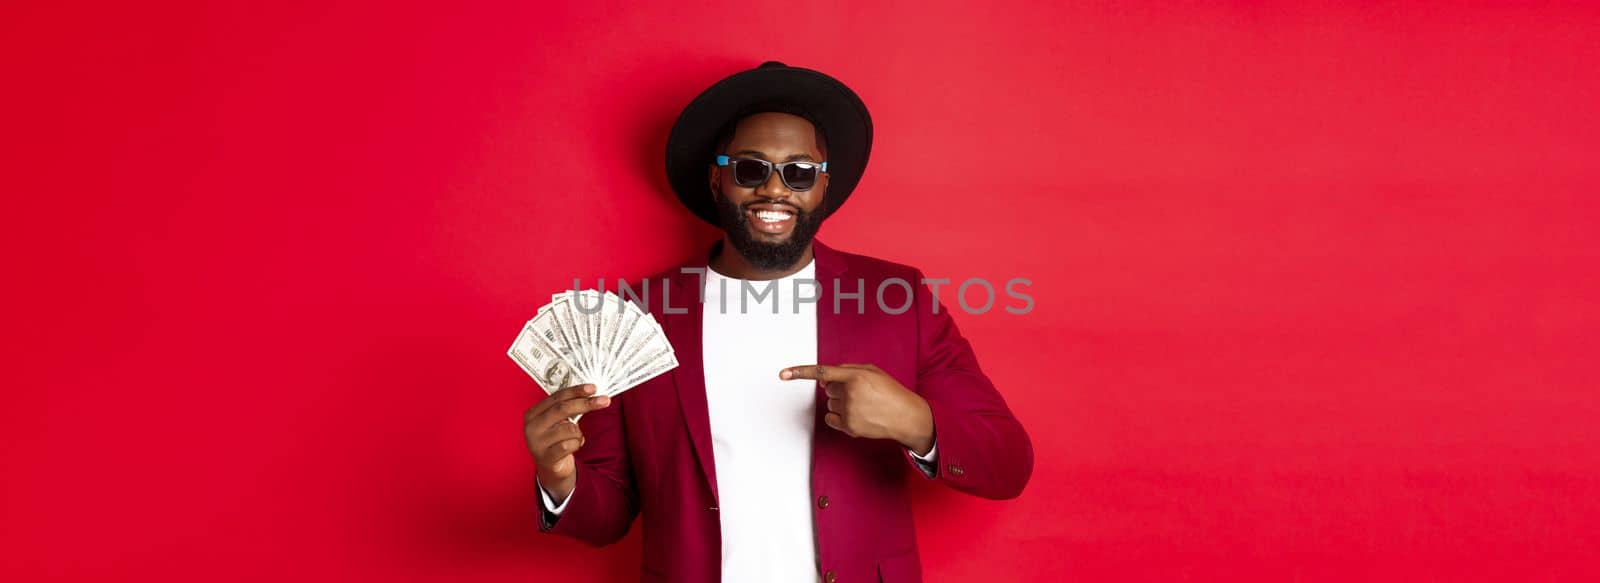 Handsome and stylish african american male model showing money and smiling, wearing sunglasses and fancy hat, standing over red background.